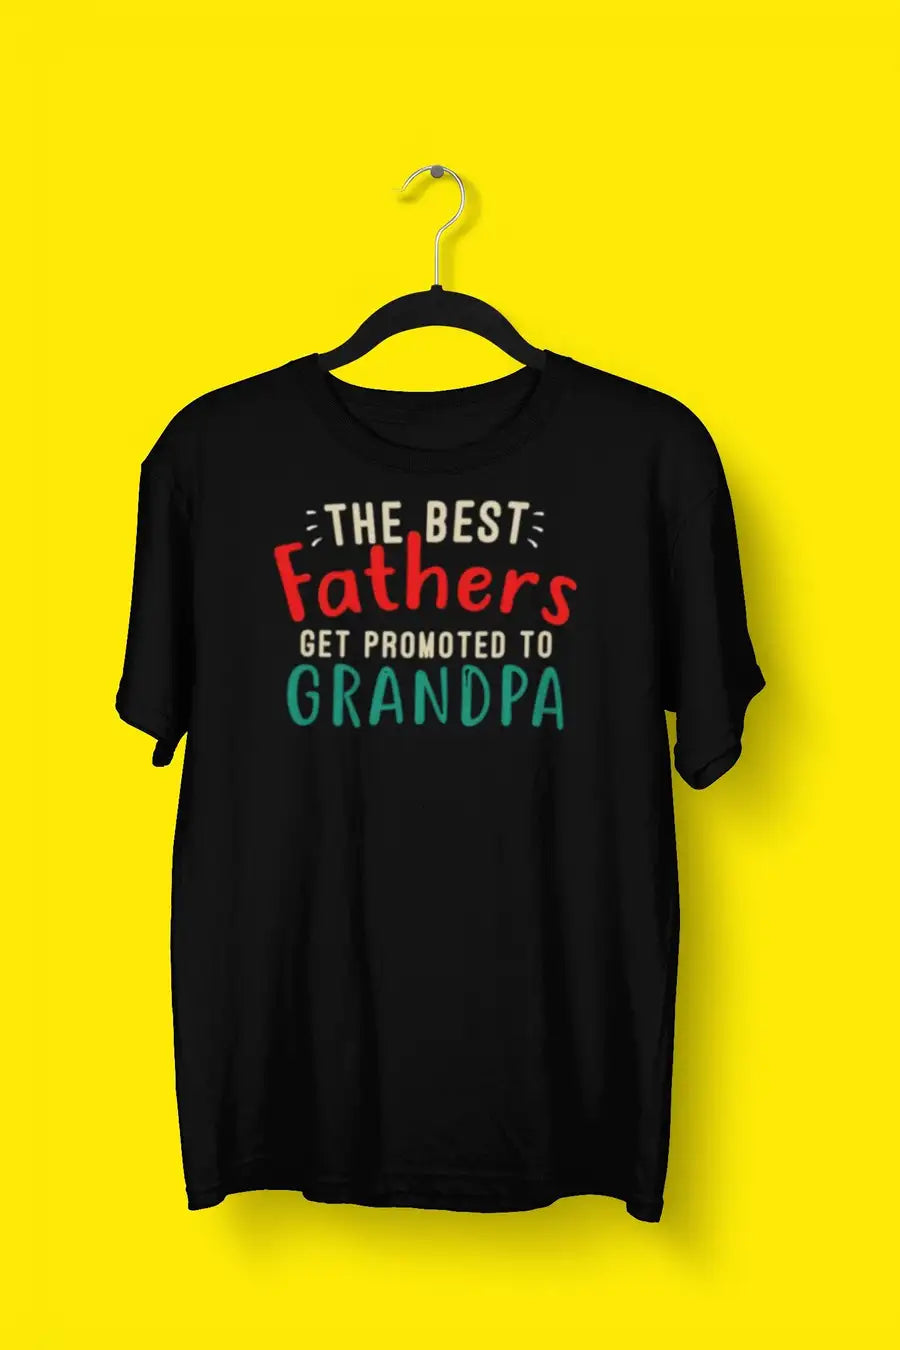 The Best Fathers Get Promoted To Grandpa T Shirt for New Grandfathers | Premium Design | Catch My Drift India - Catch My Drift India Clothing black, clothing, dad, father, made in india, pare